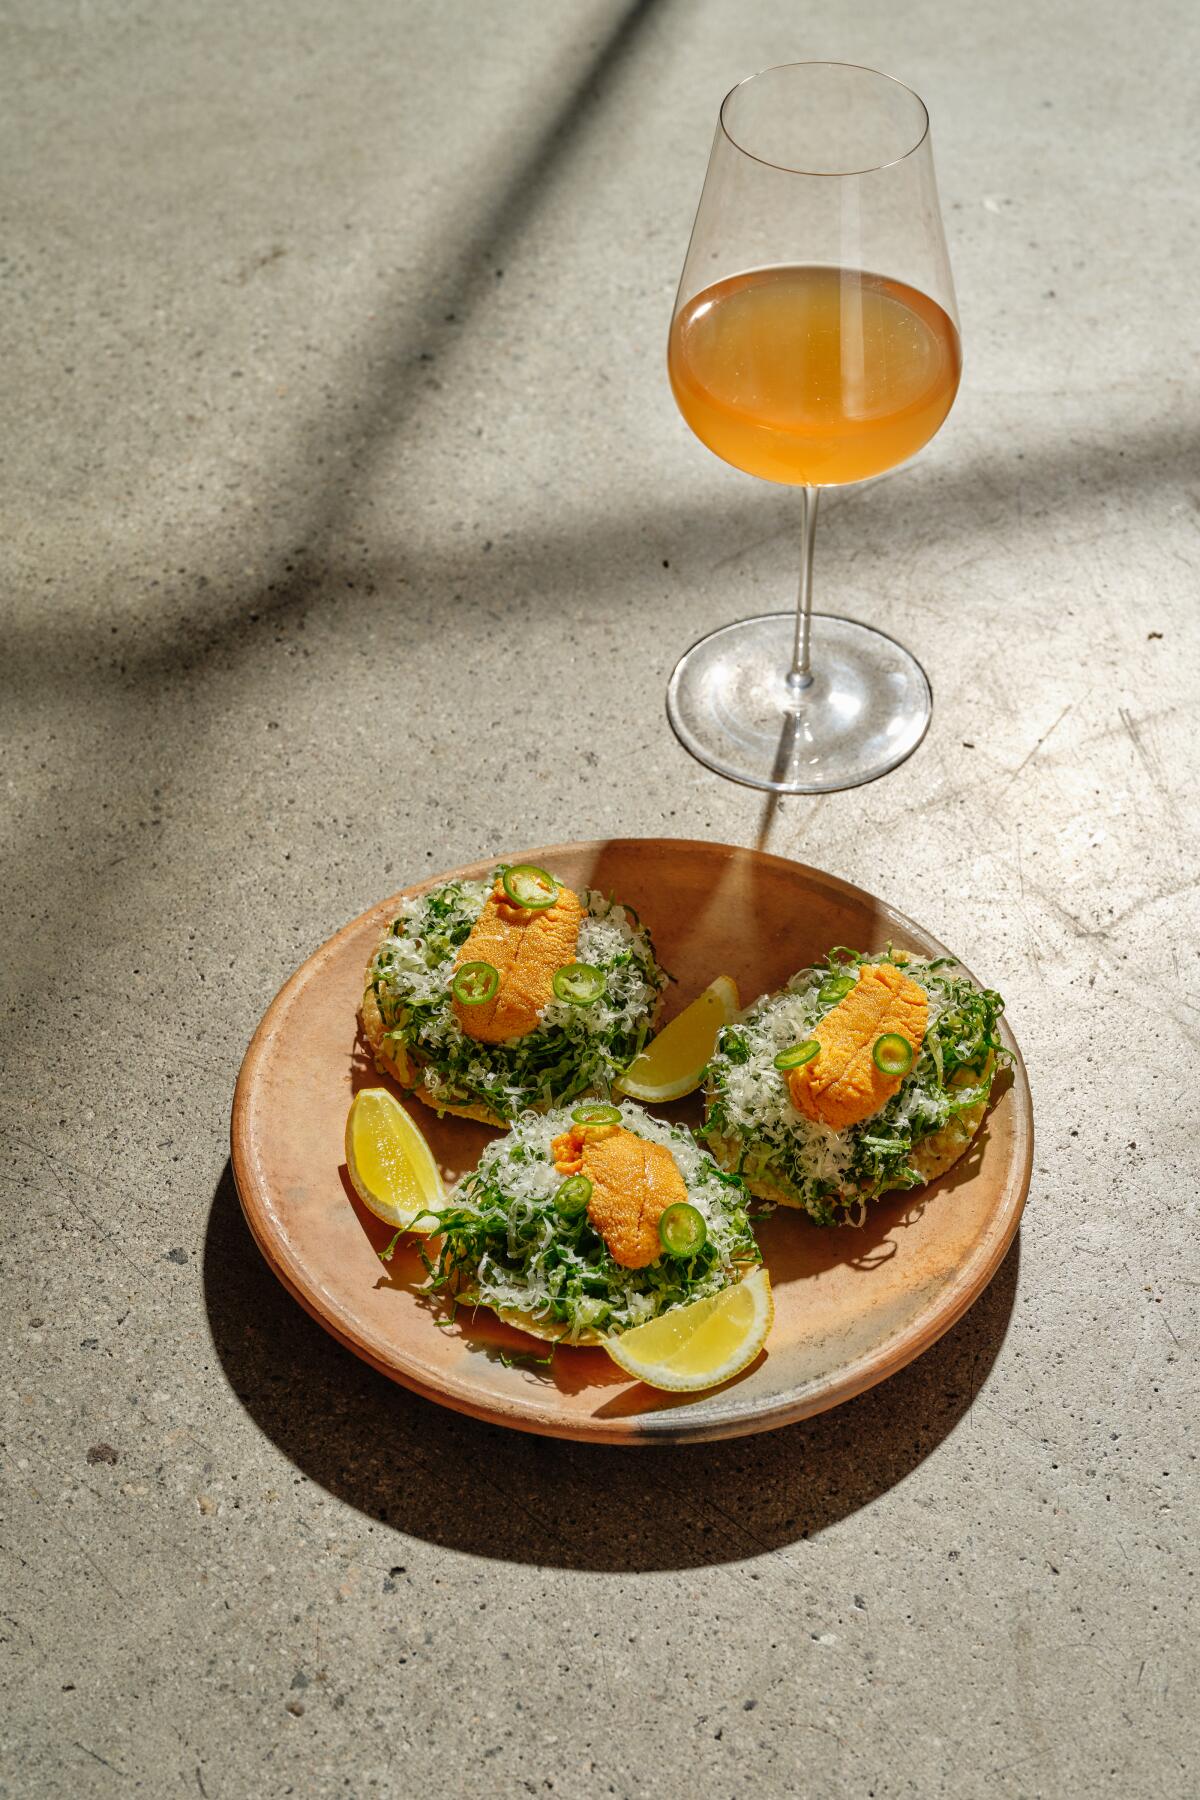 Uni tostada from Damian, served on a plate next to a wine glass holding an orange beverage.